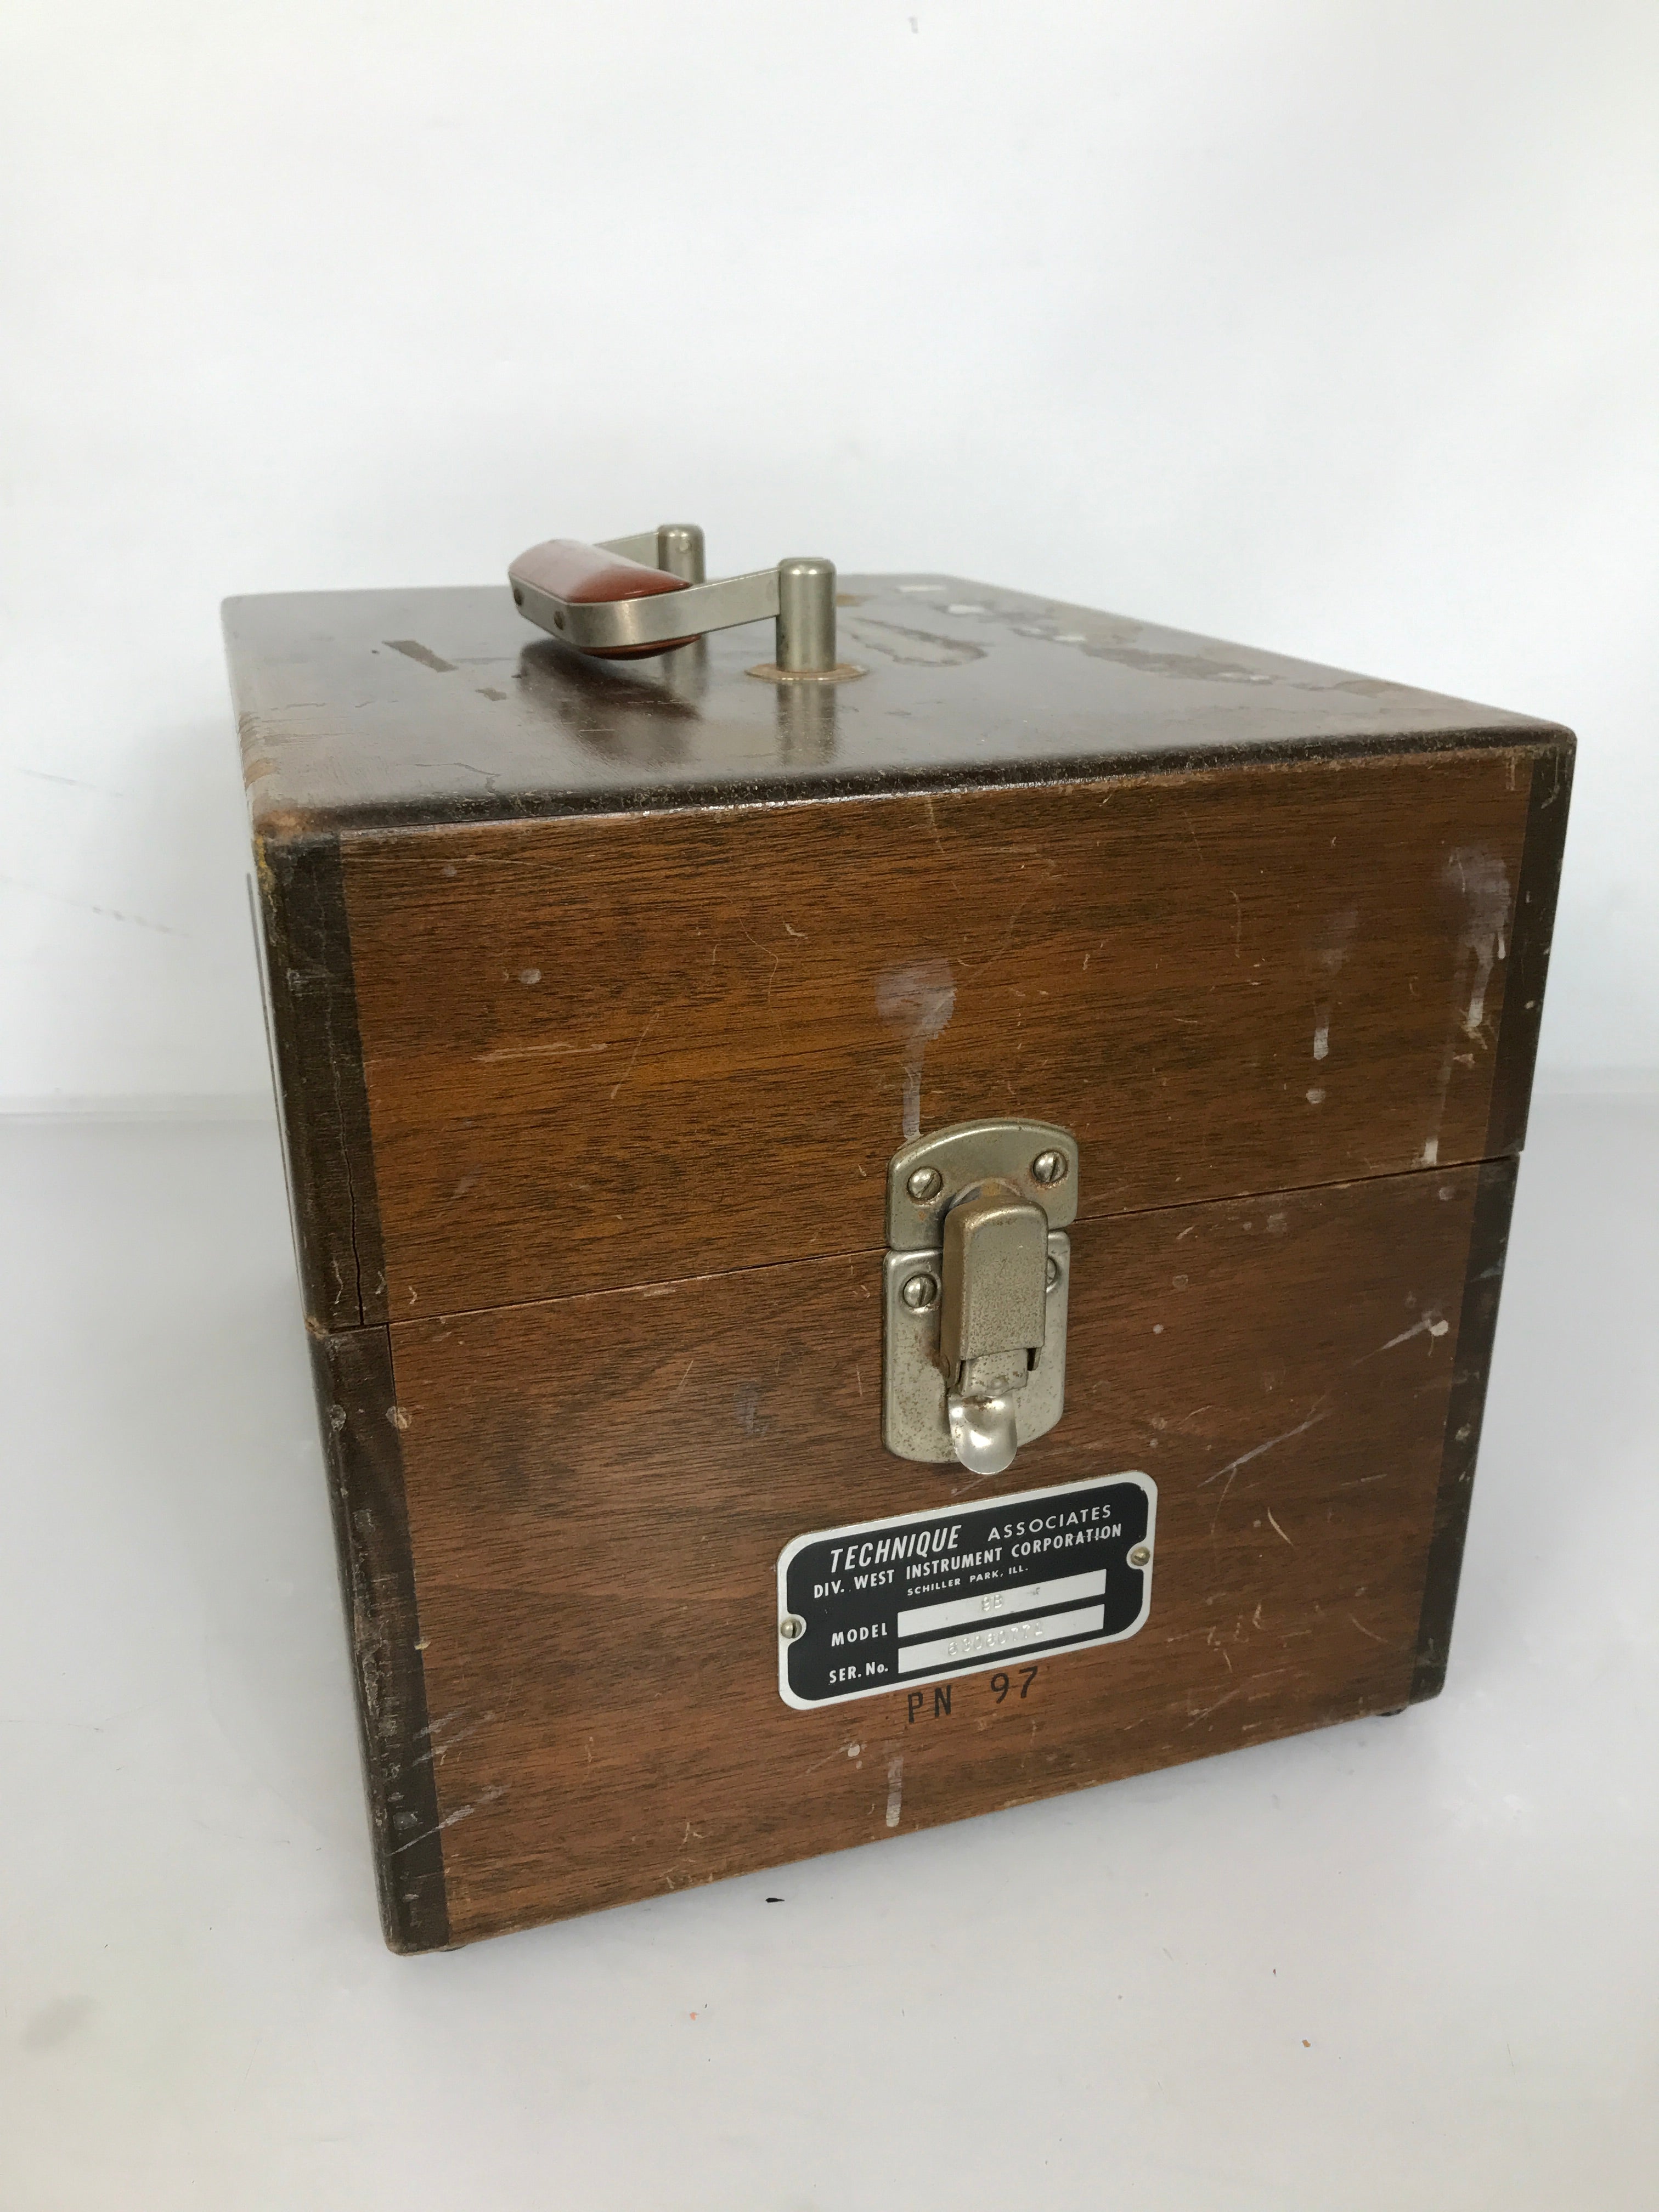 Vintage Technique Model 9B Pyrotest Instrument in Wooden Box